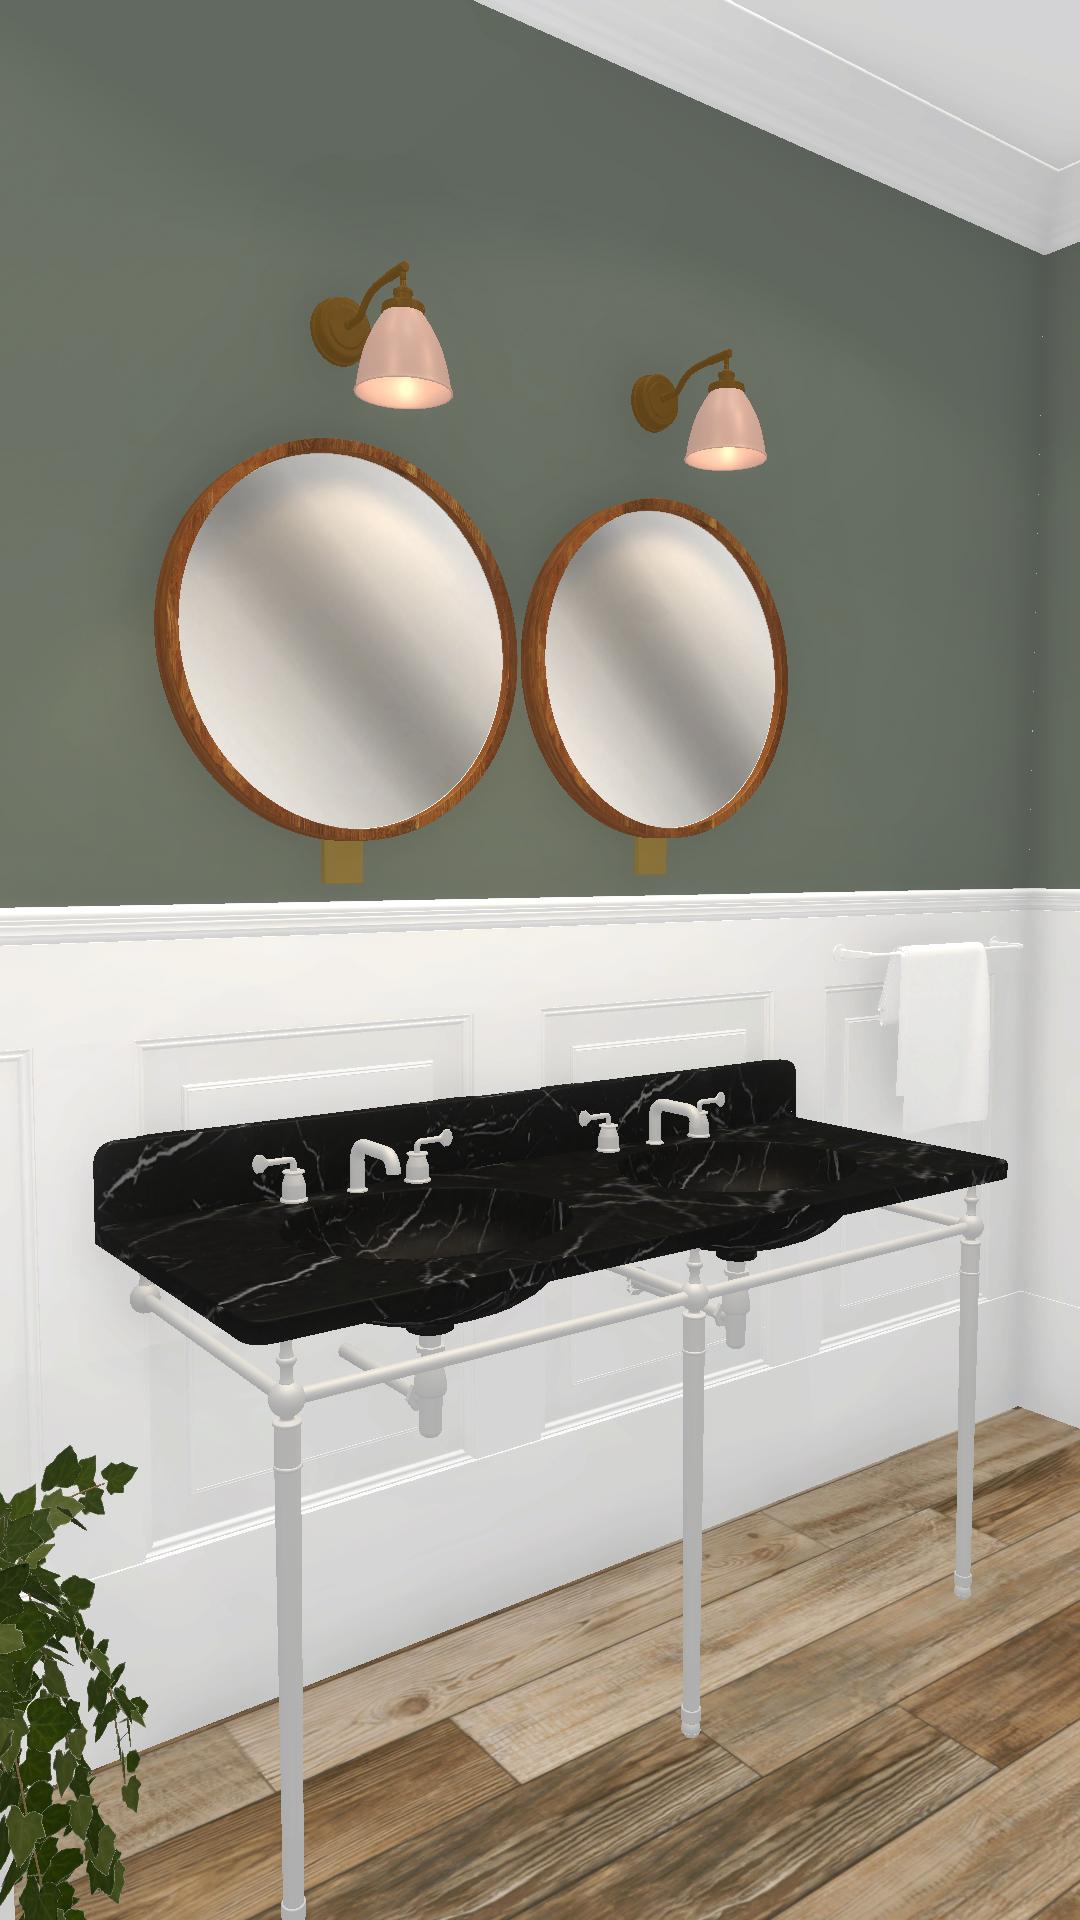 sinks from bathroom restyle